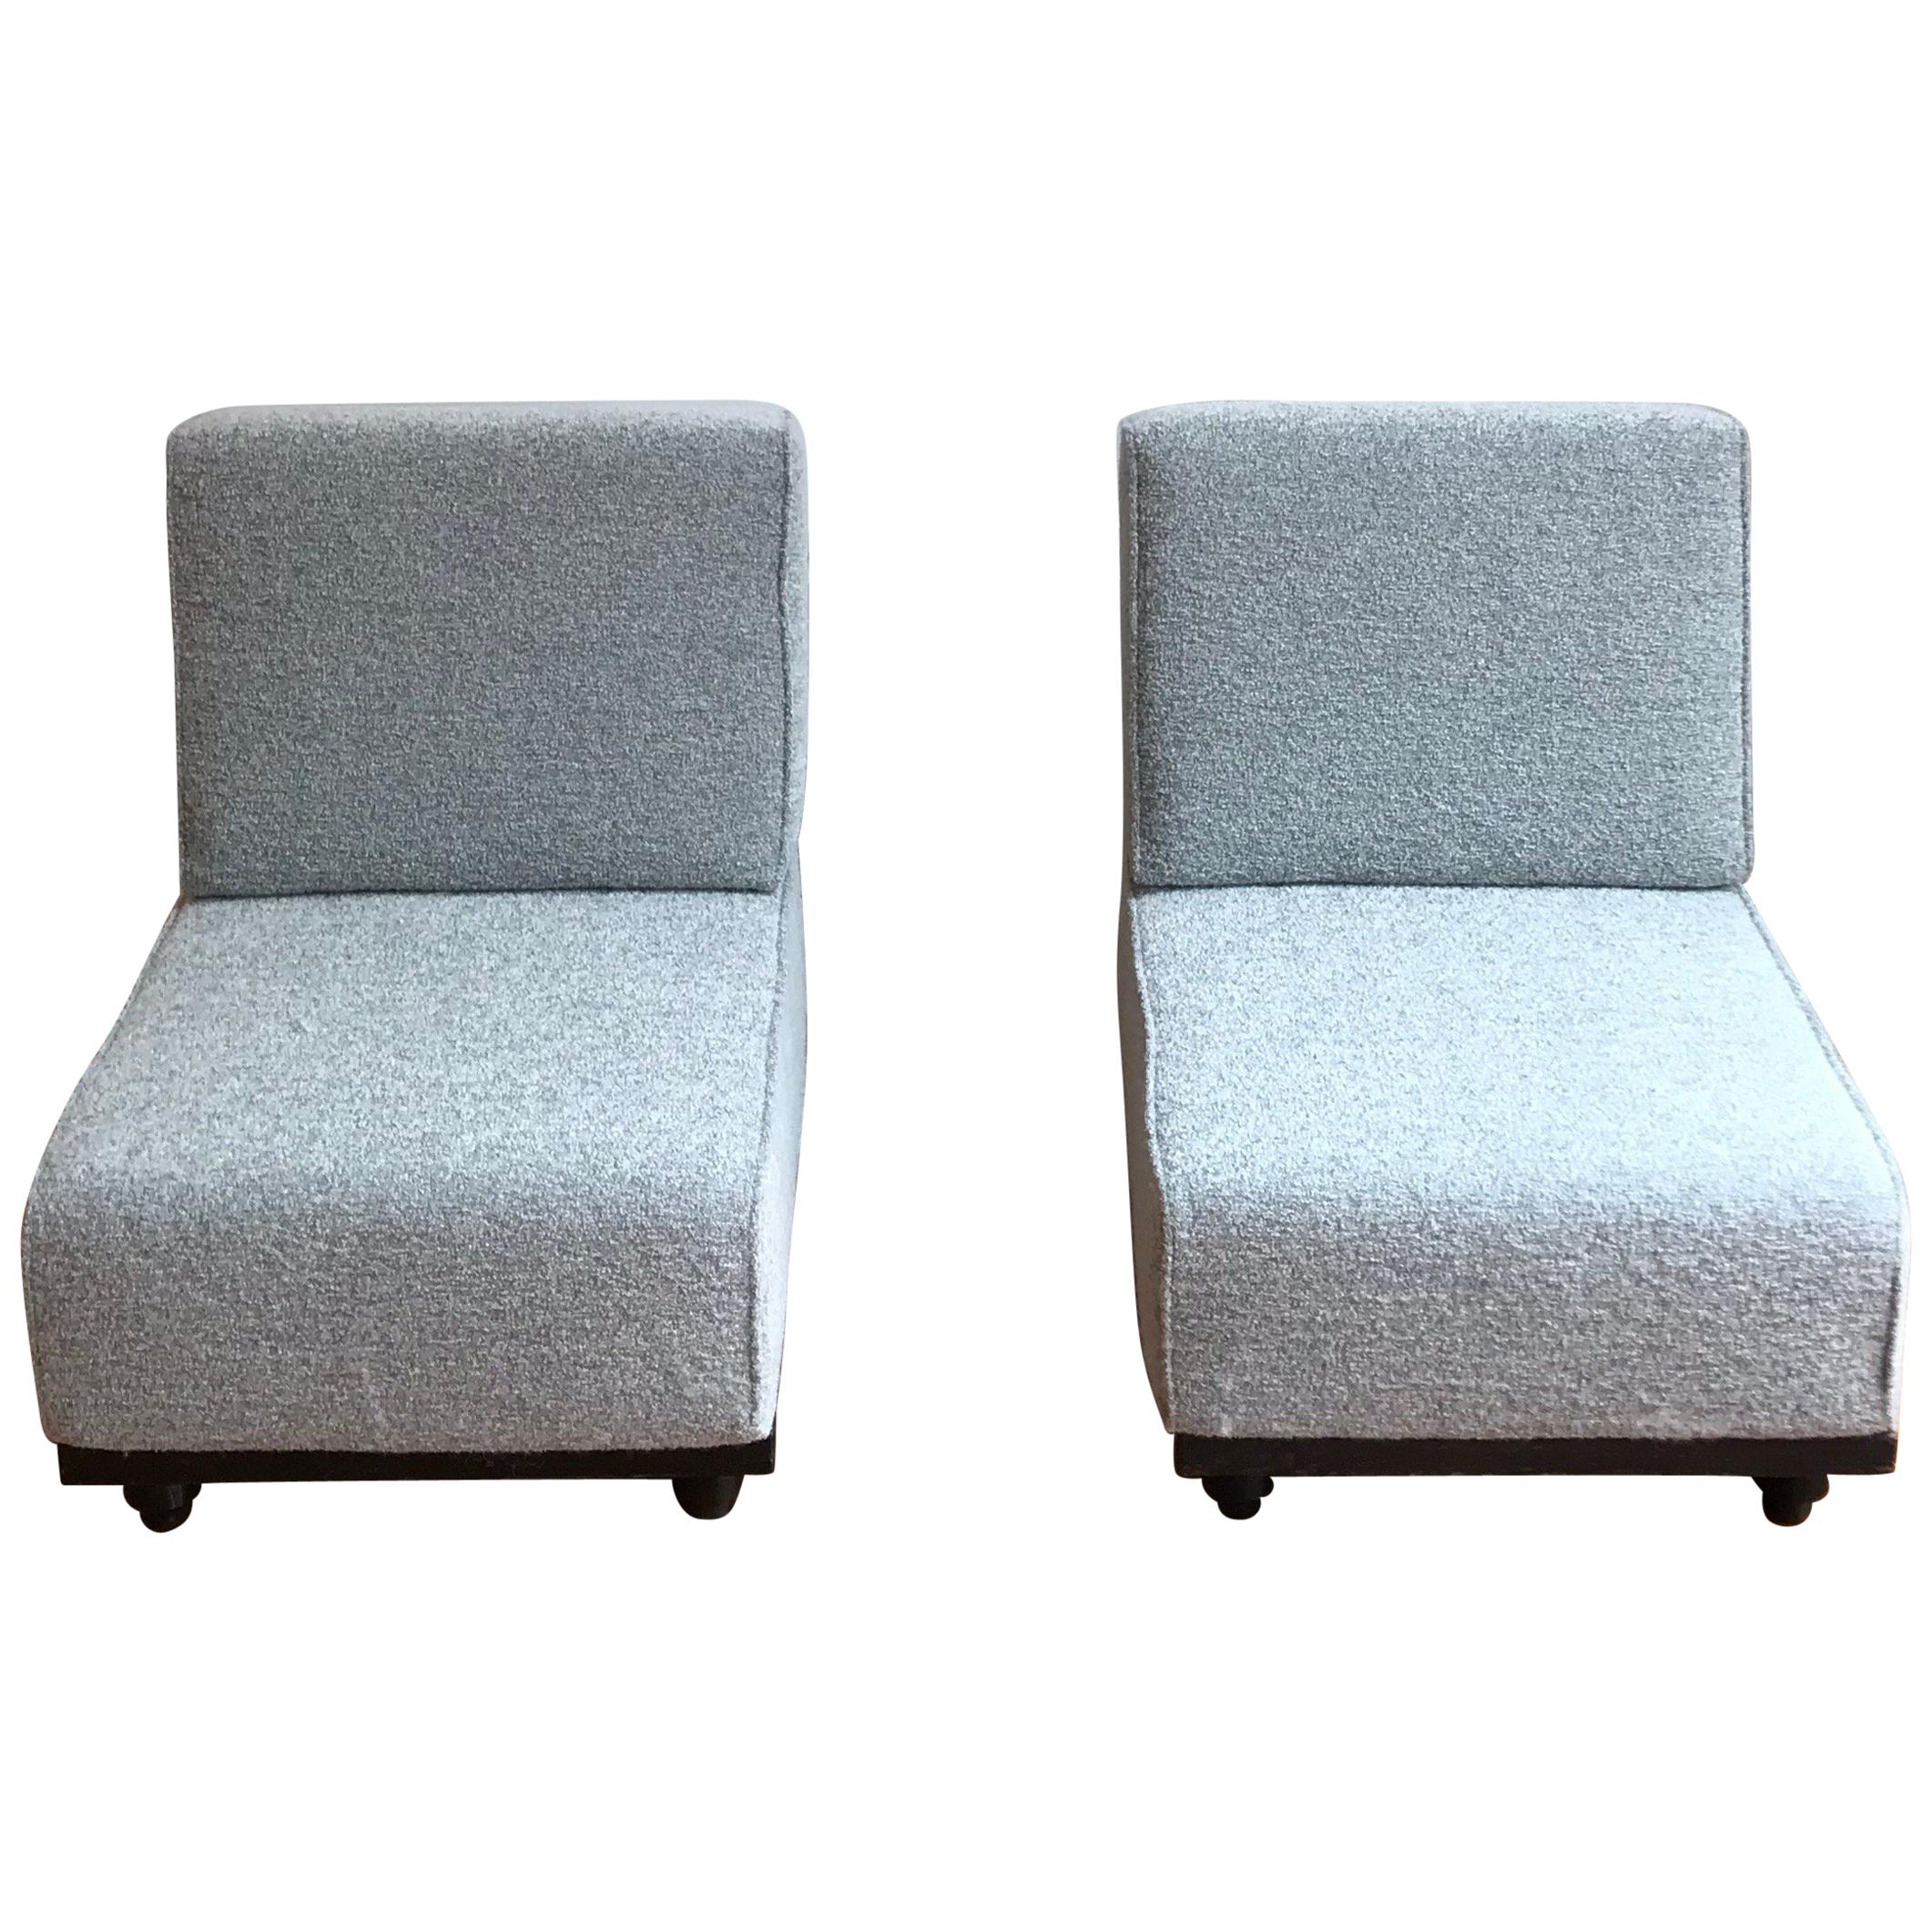 Pair of lounge chairs ''Elmyre'' by Guillerme Chambron reupholstered entirely with a Pierre Frey fabric Suzon Grey. 

Robert Guillerme (1913 - 1990) and Jacques Chambron (1914 - 2001).
Their company, Votre Maison, has marked the history of French